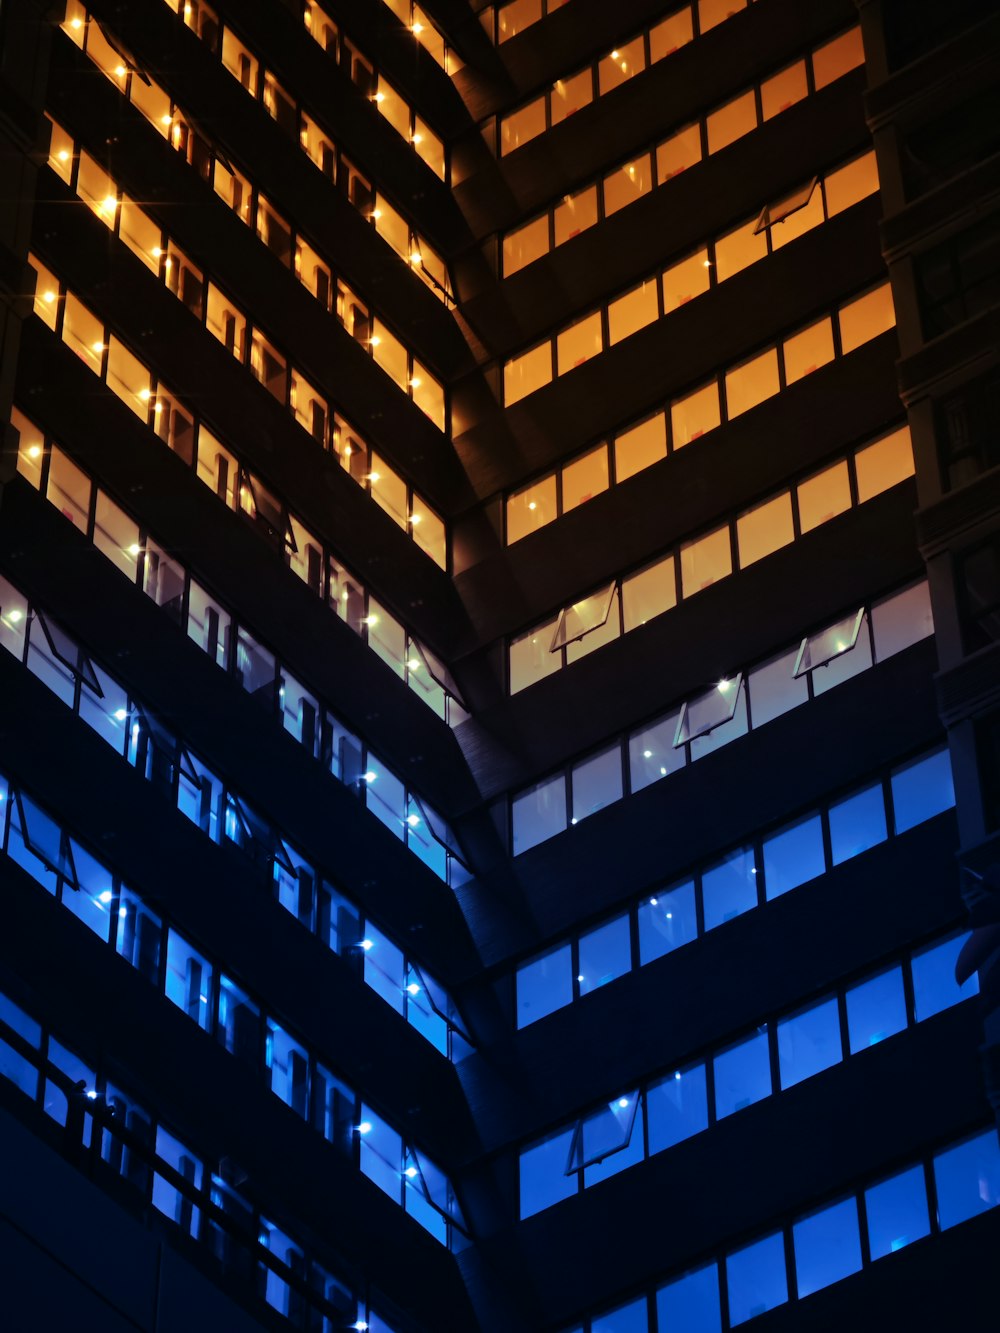 a tall building with many windows lit up at night